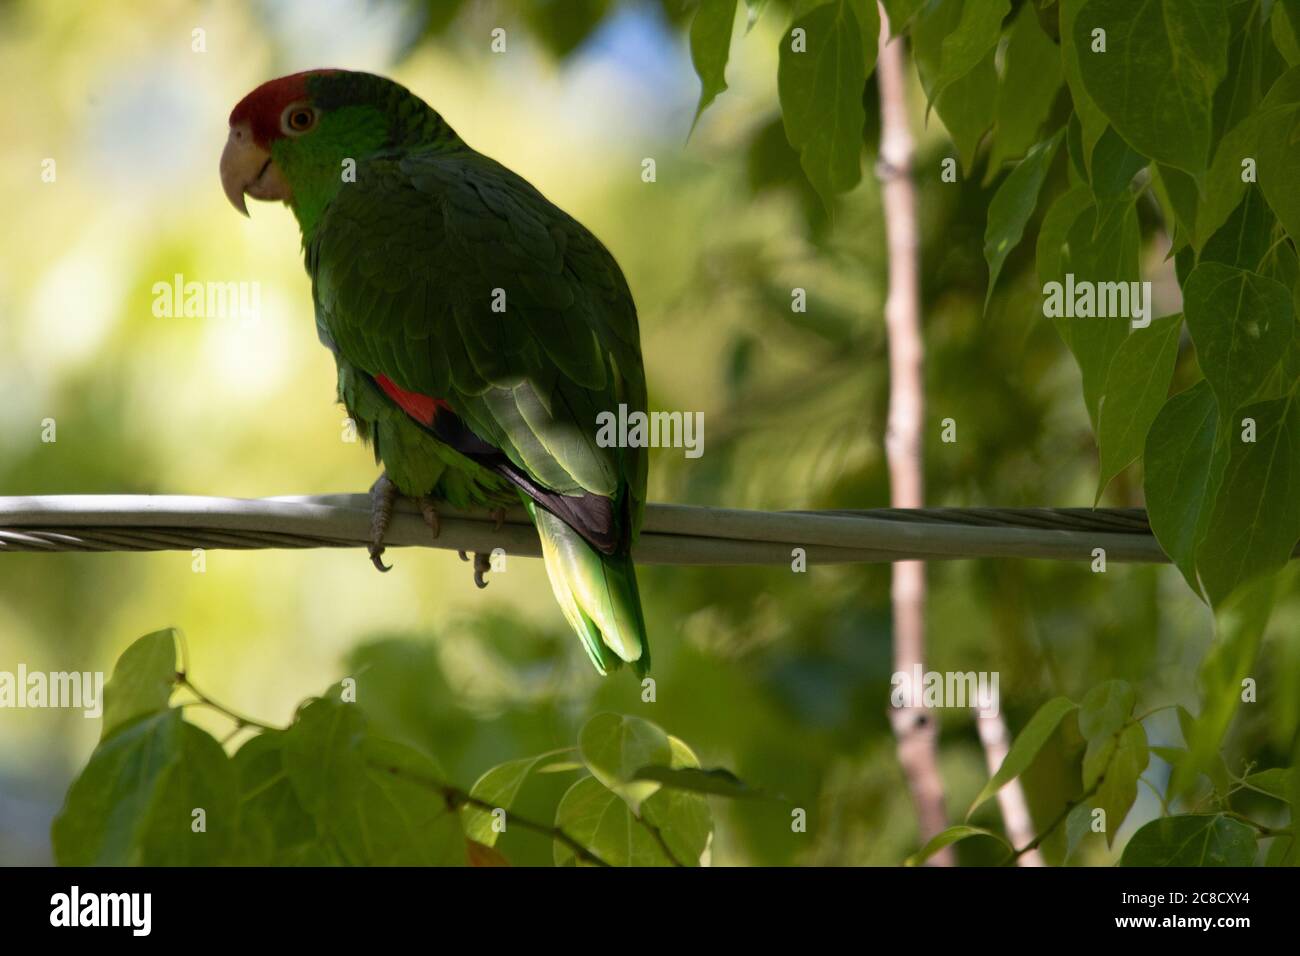 Closeup shot of a Rose-ringed parakeet parrot sitting on a wire Stock Photo